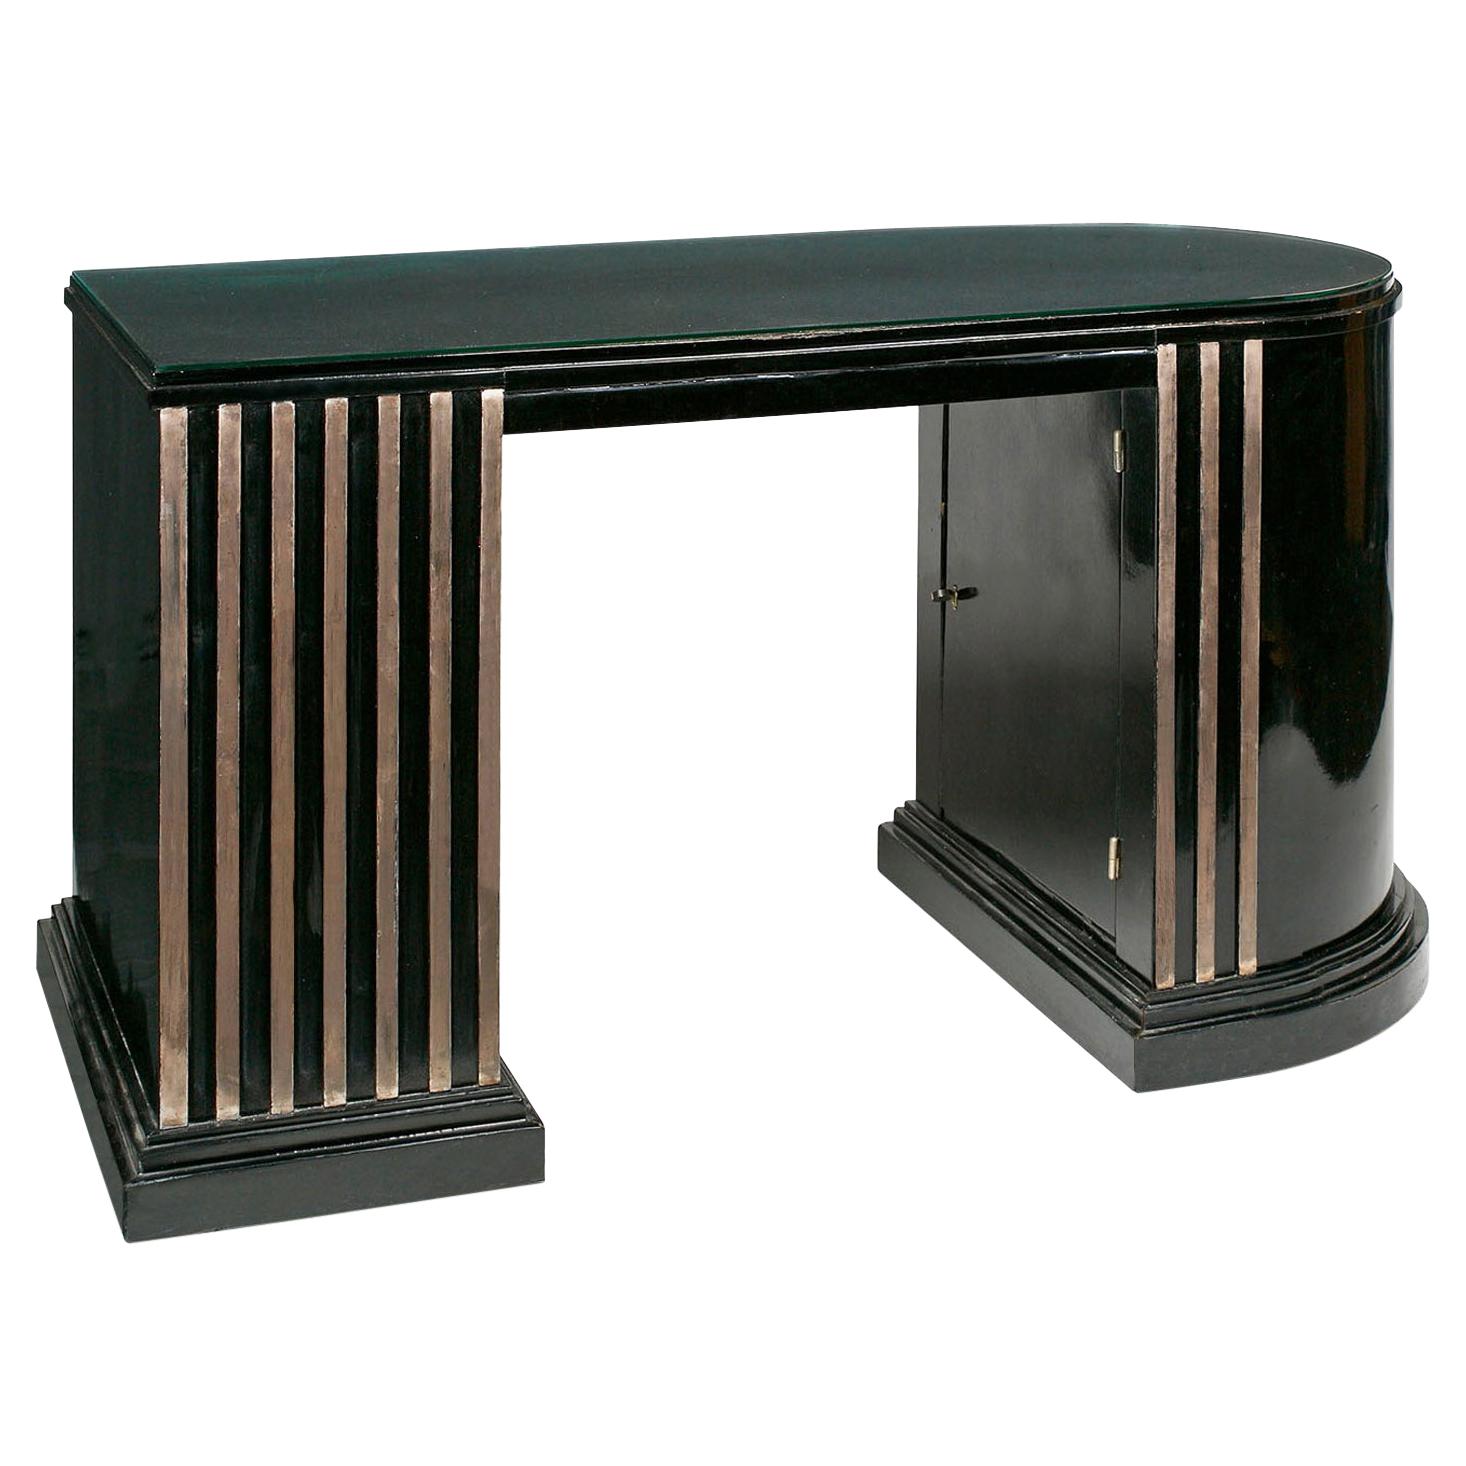 French Art Deco Black Lacquer Desk with White-Gold Leaf Details